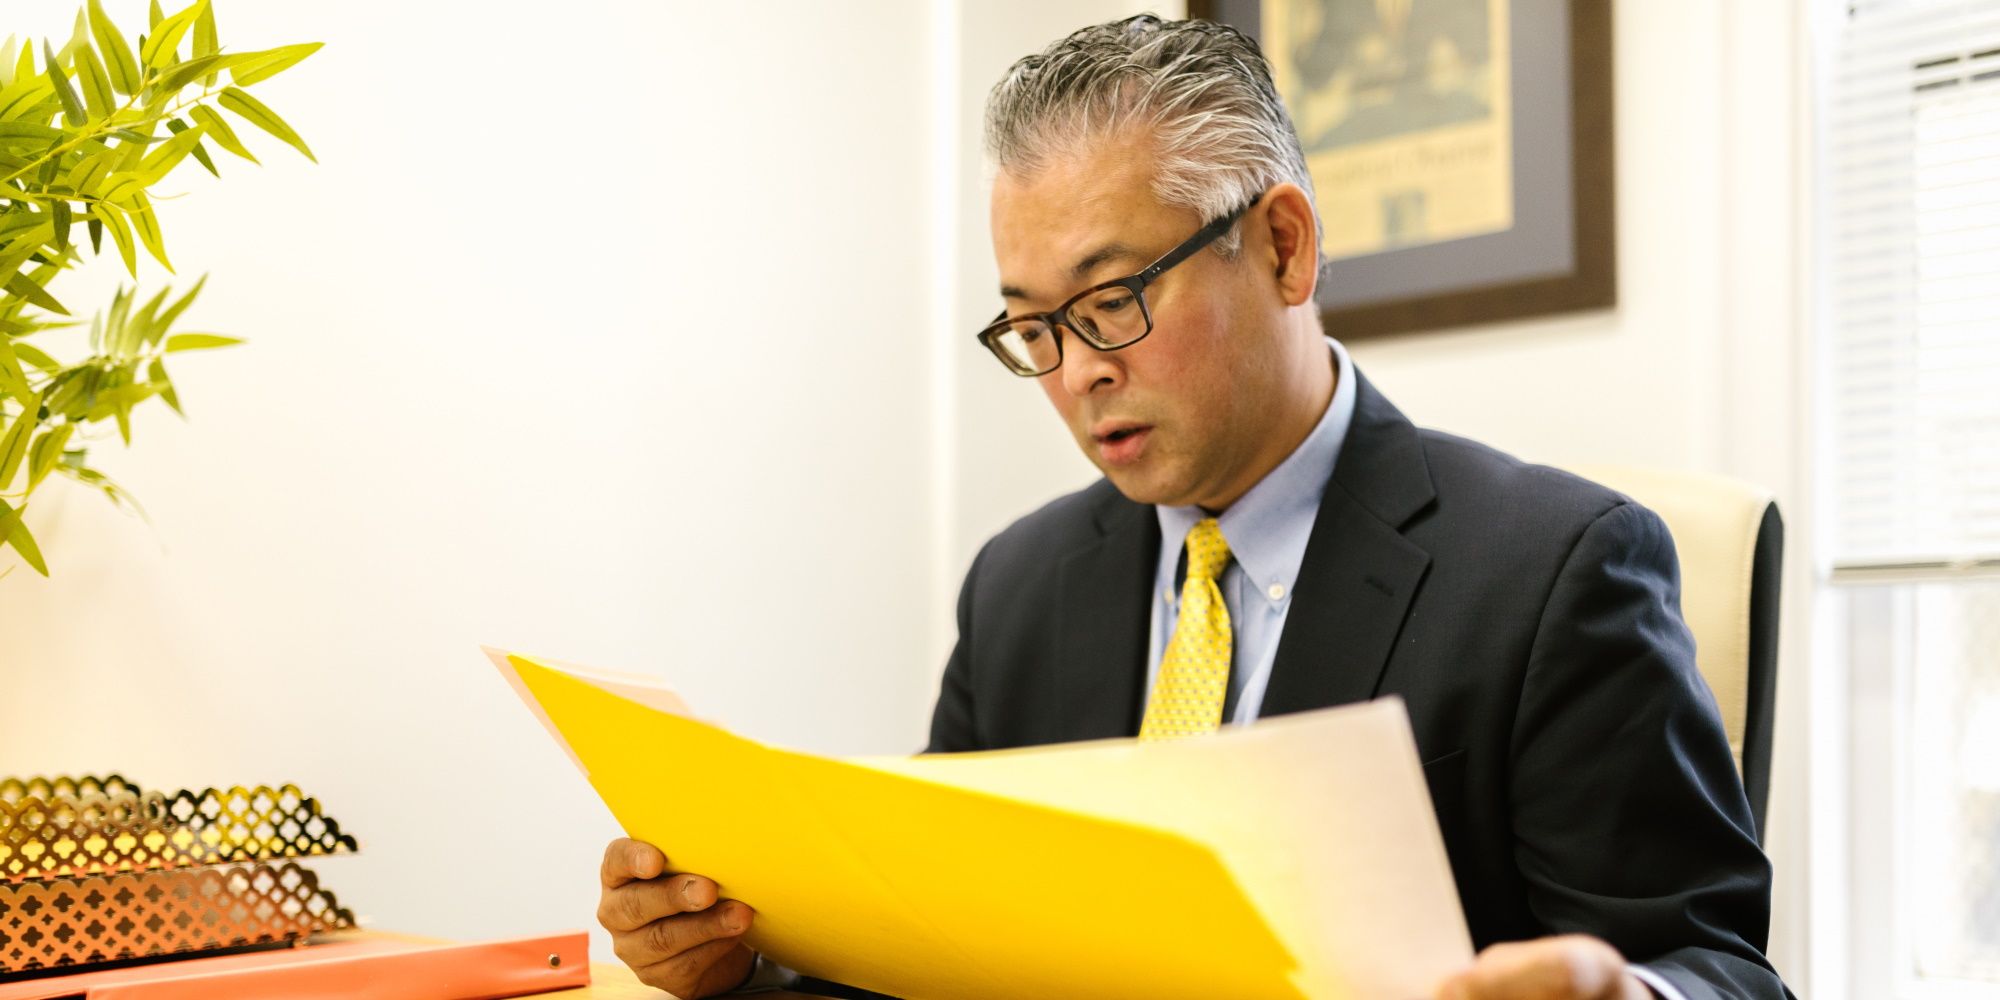 business man reading a document in yellow folder